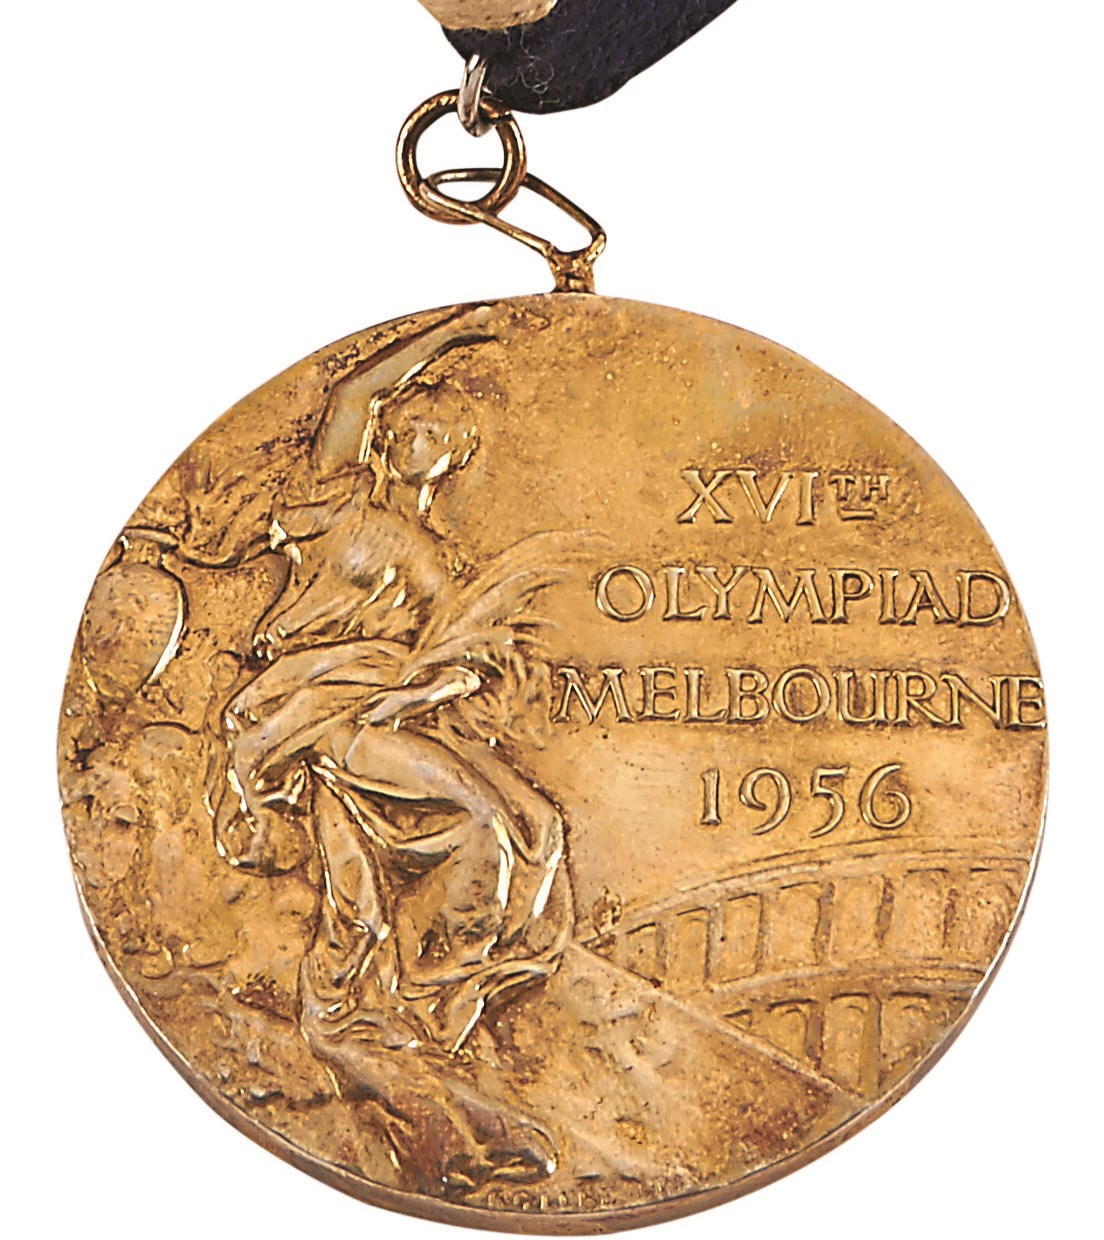 Olympics and All Sports - "World's Strongest Man" 1956 U.S Olympic Weightlifting Gold Medal